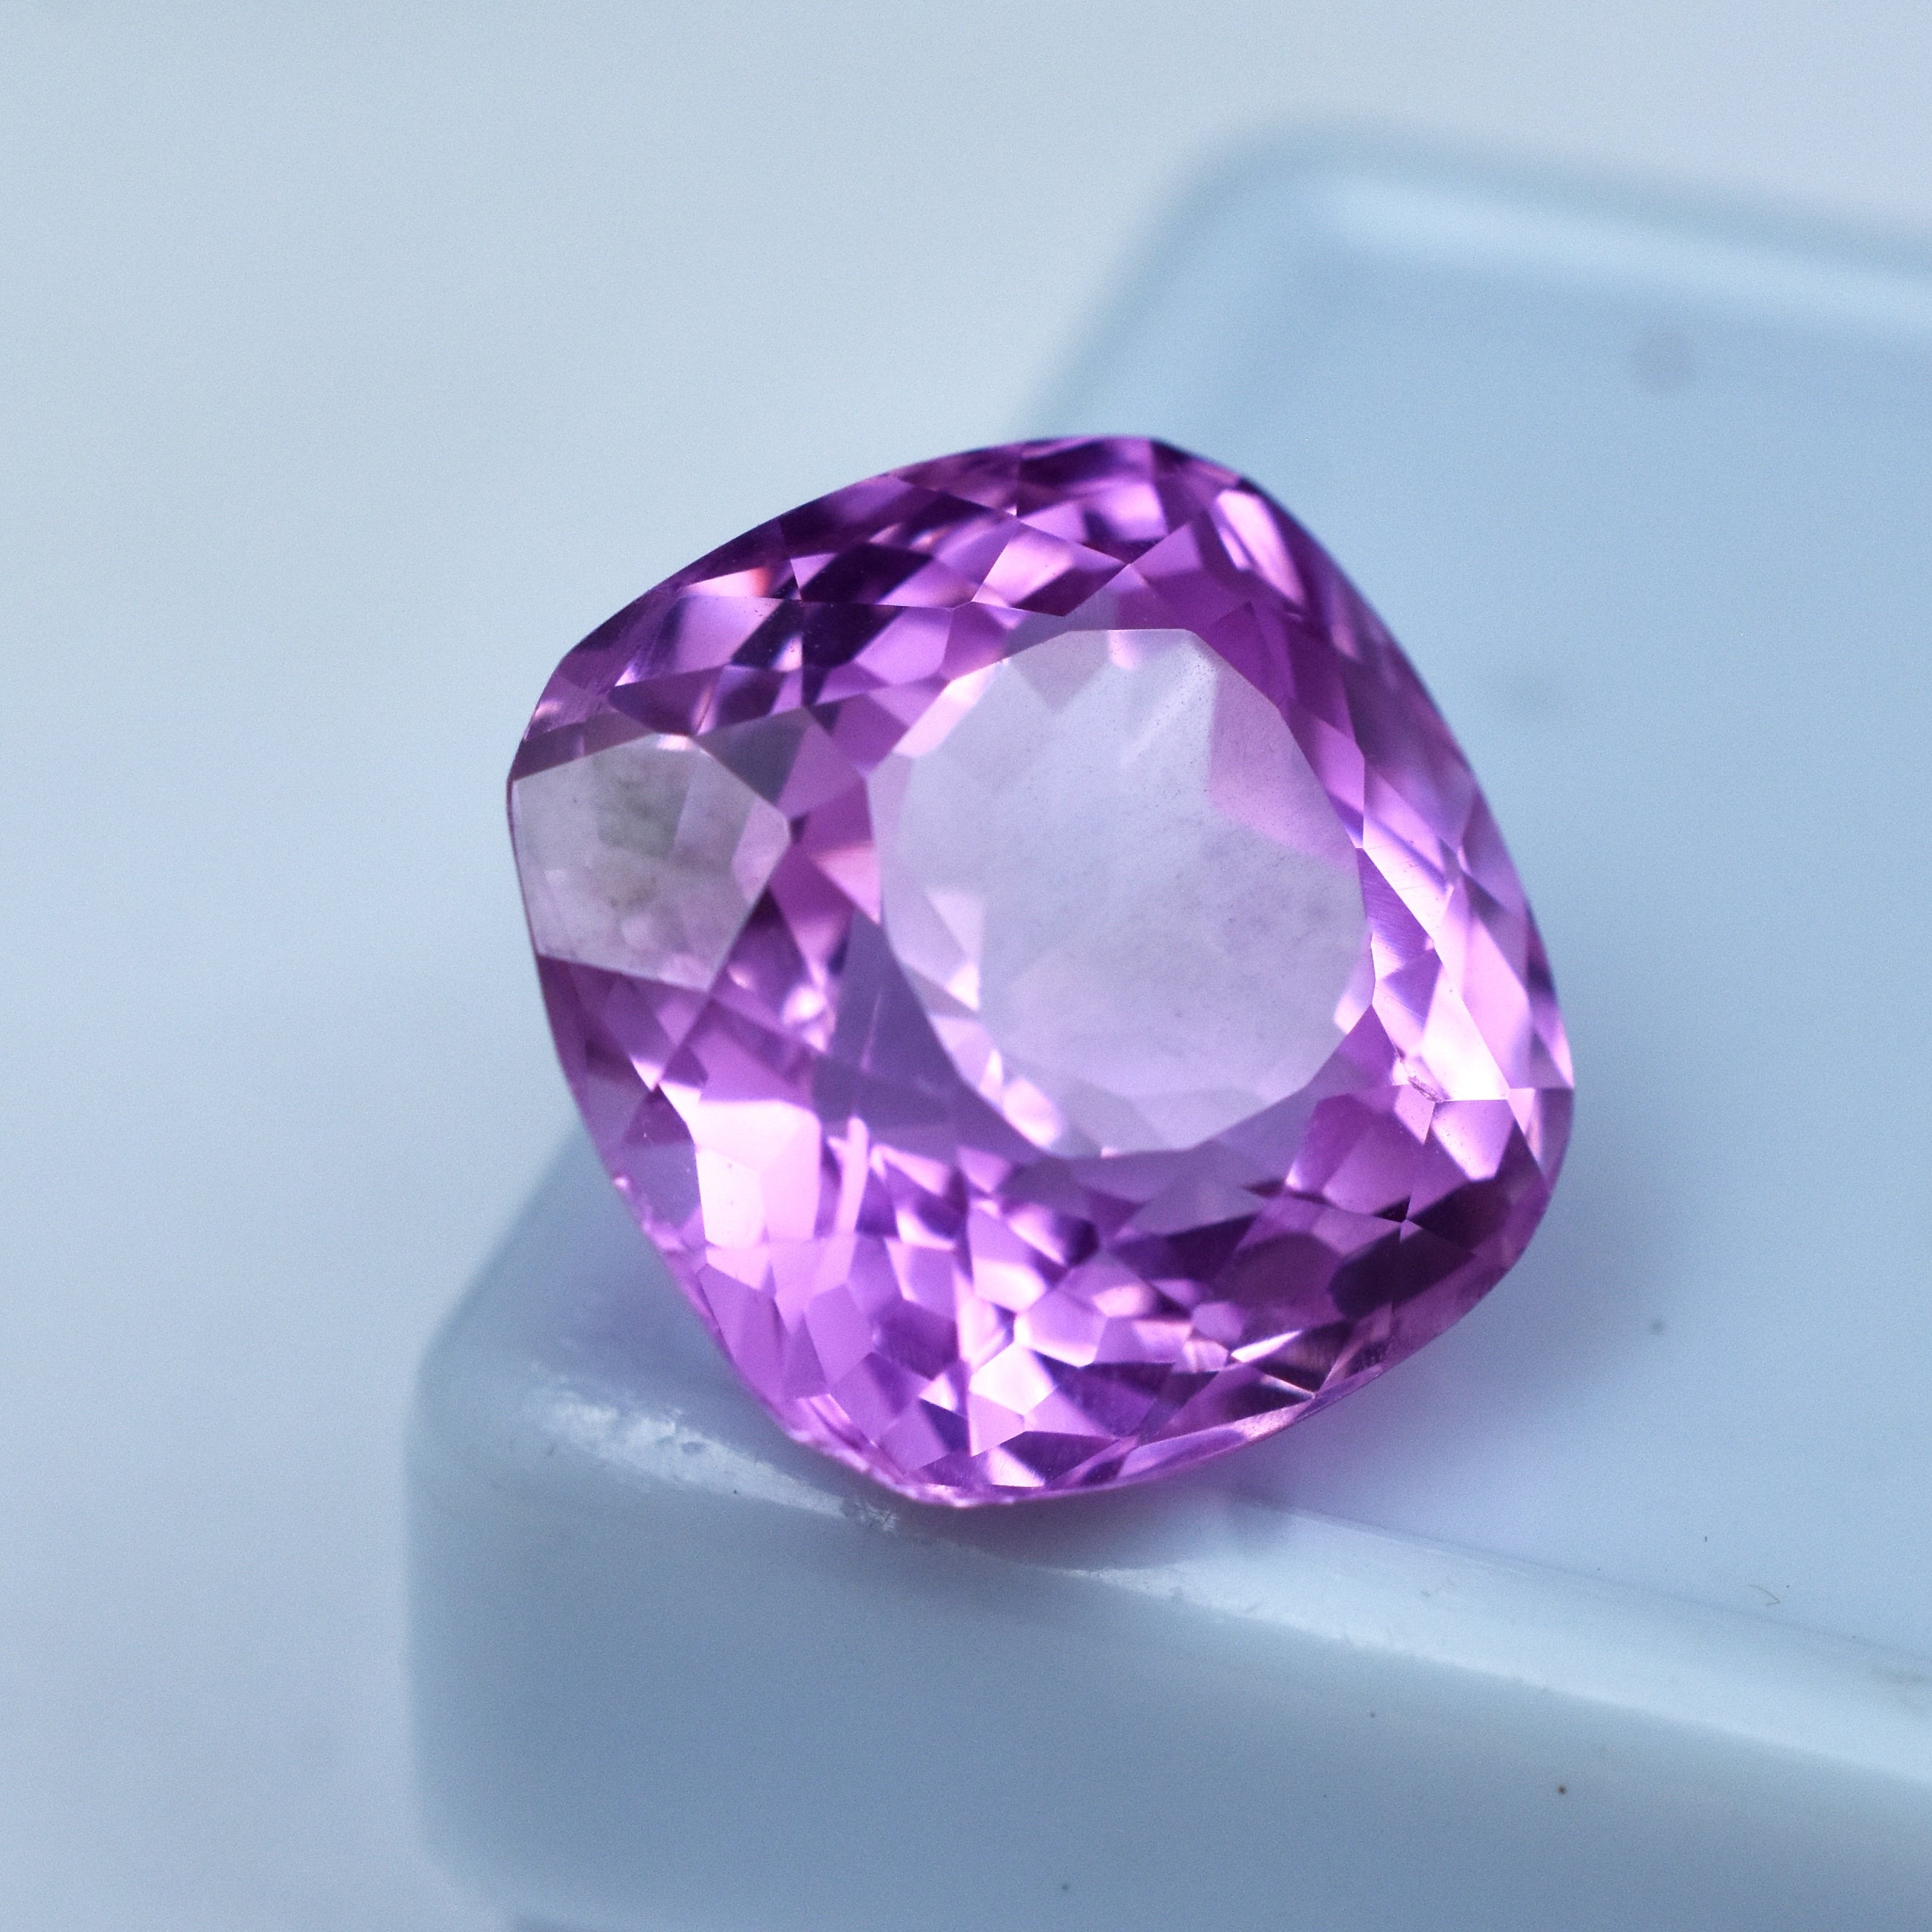 Sapphire From Sri Lanka 11.35 Carat Natural Flawless Ceylon Pink Sapphire Certified Square Cushion Shape Loose Gemstone Most Genuine Sapphire For Jewelry Making Gemstone Natural Pink Sapphire Stone